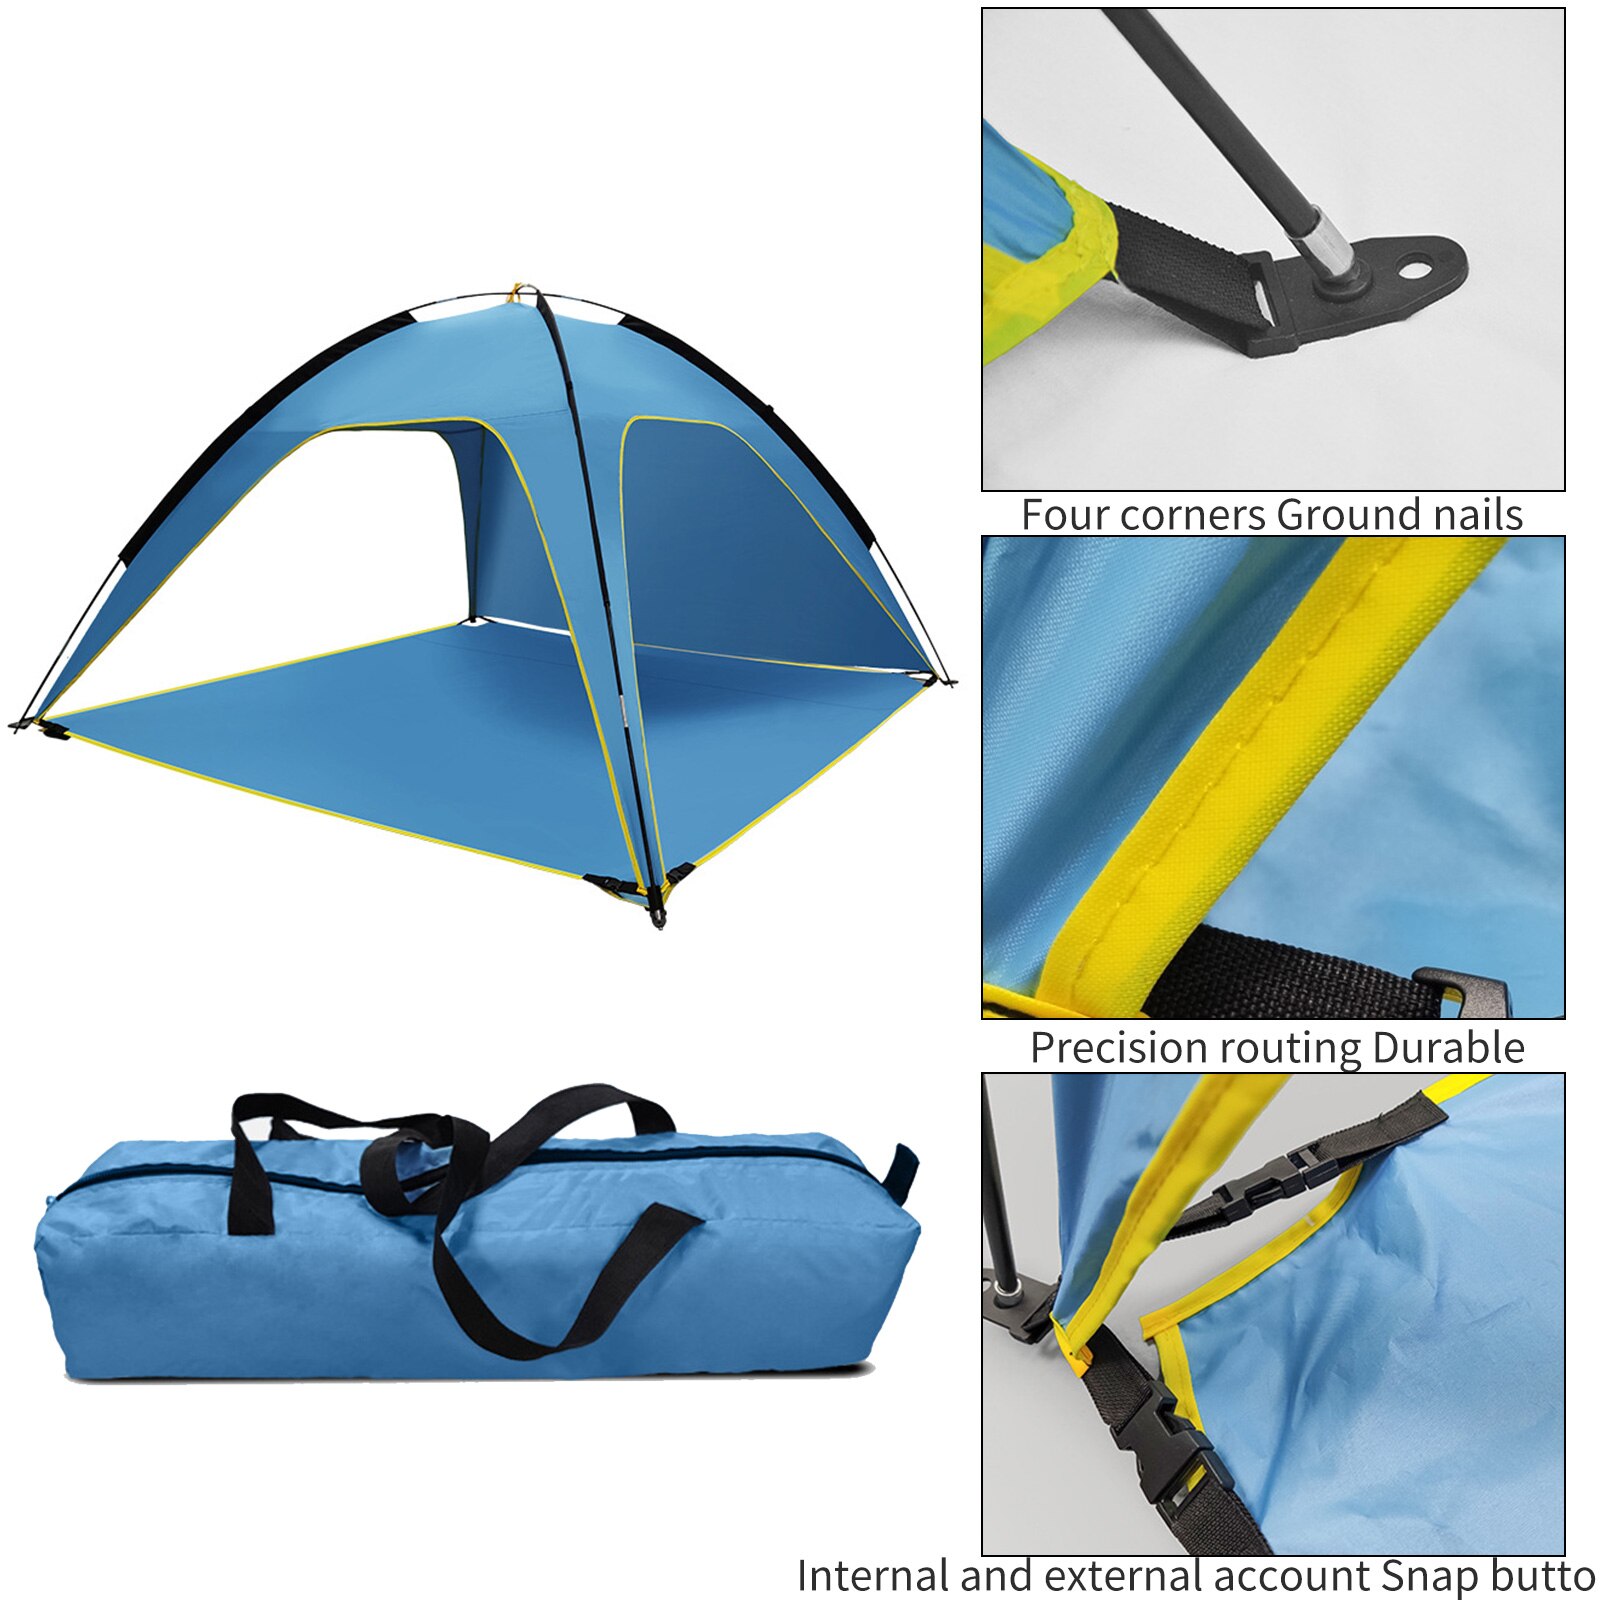 Cheap Goat Tents Portable Backpacking Tent Automatic Open Sun Shelter Camping Tent with Carry Bag for Outdoor Hiking Travel Beach   